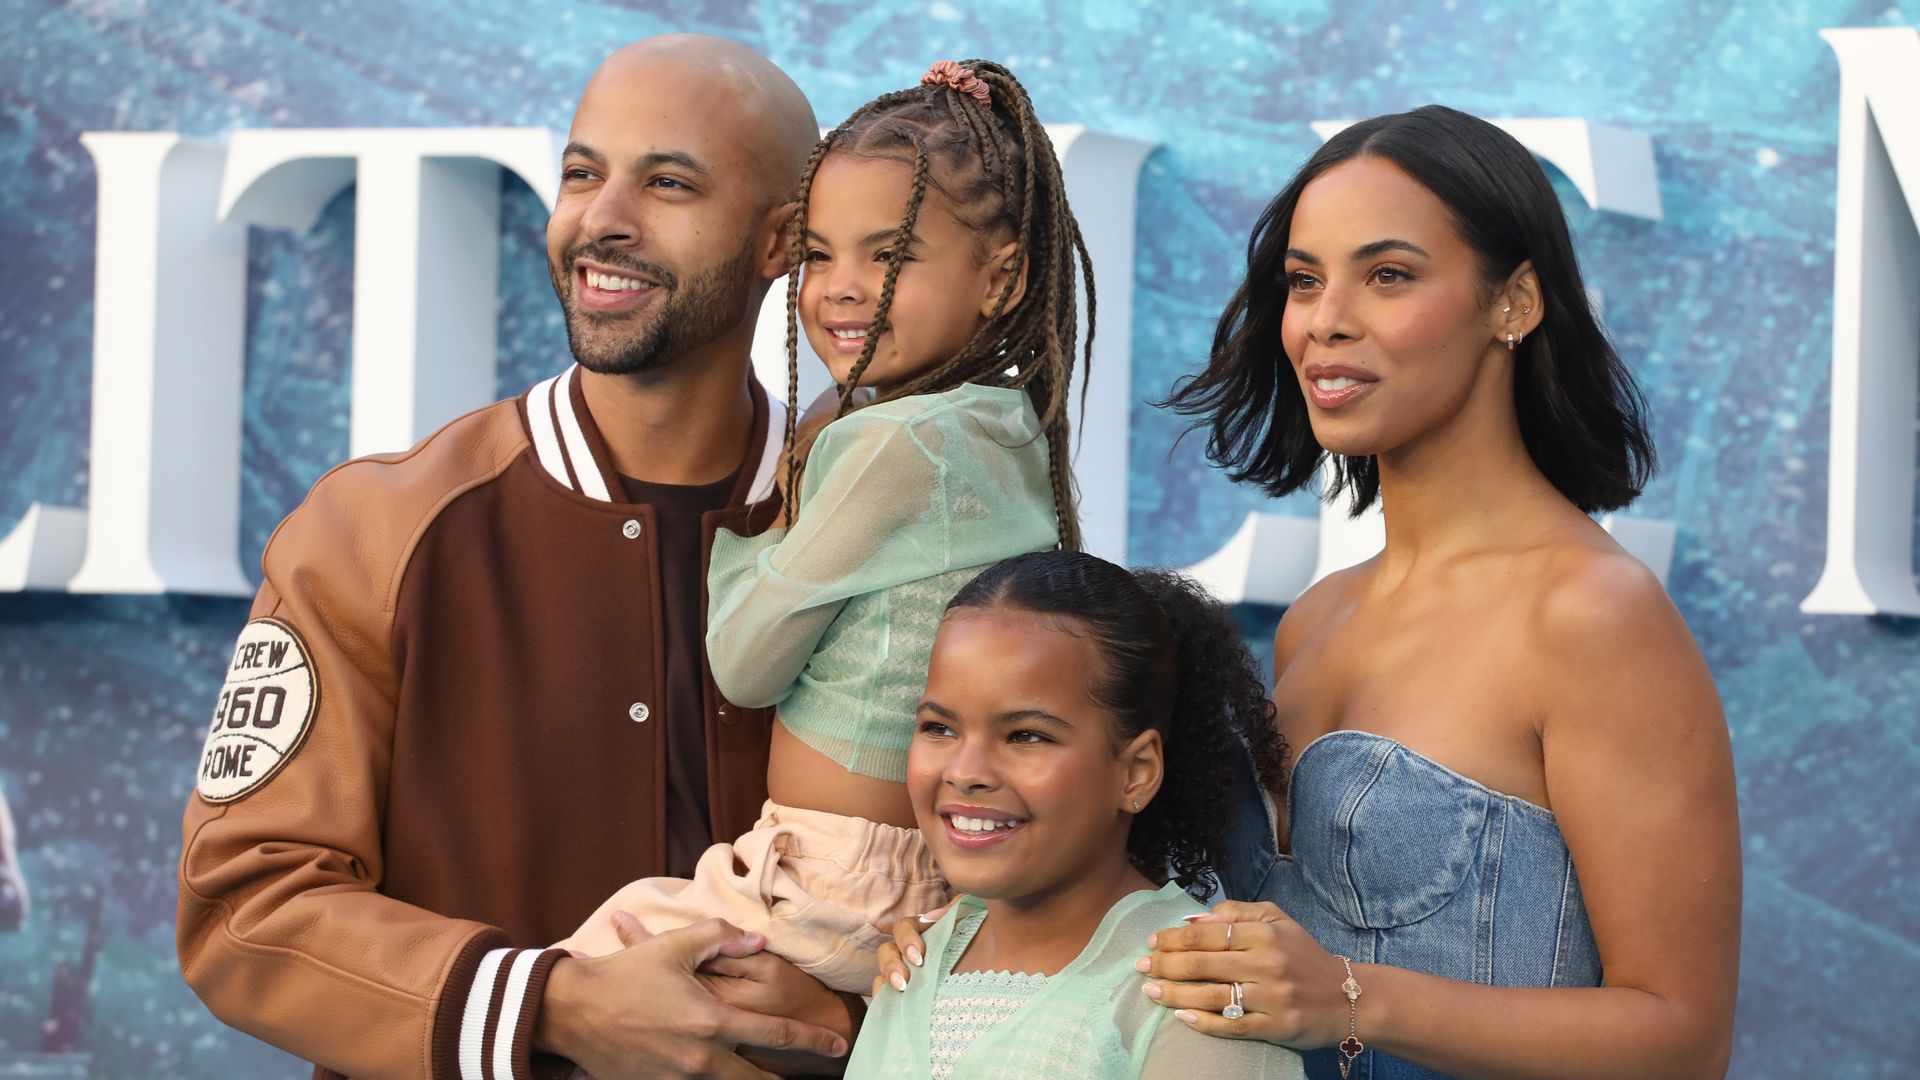 Marvin Humes, Valentina Raine Humes, Alaia-Mai Humes and Rochelle Humes attend the UK Premiere of "The Little Mermaid" at Odeon Luxe Leicester Square on May 15, 2023 in London, England